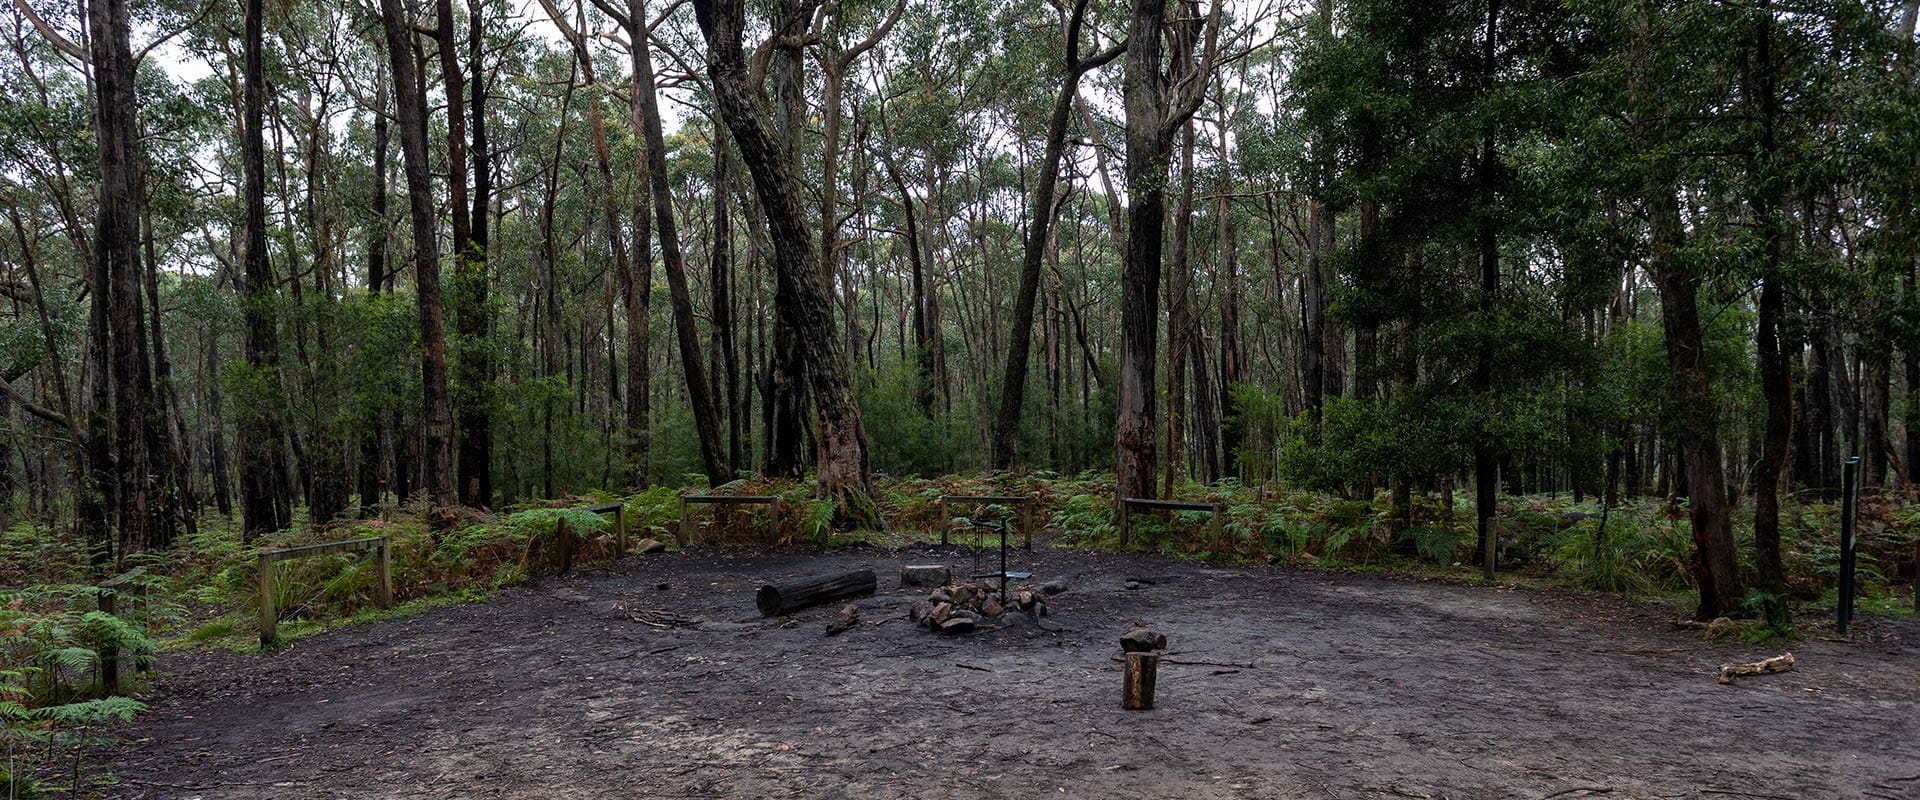 A campground with a fireplace surrounded by bushy foliage